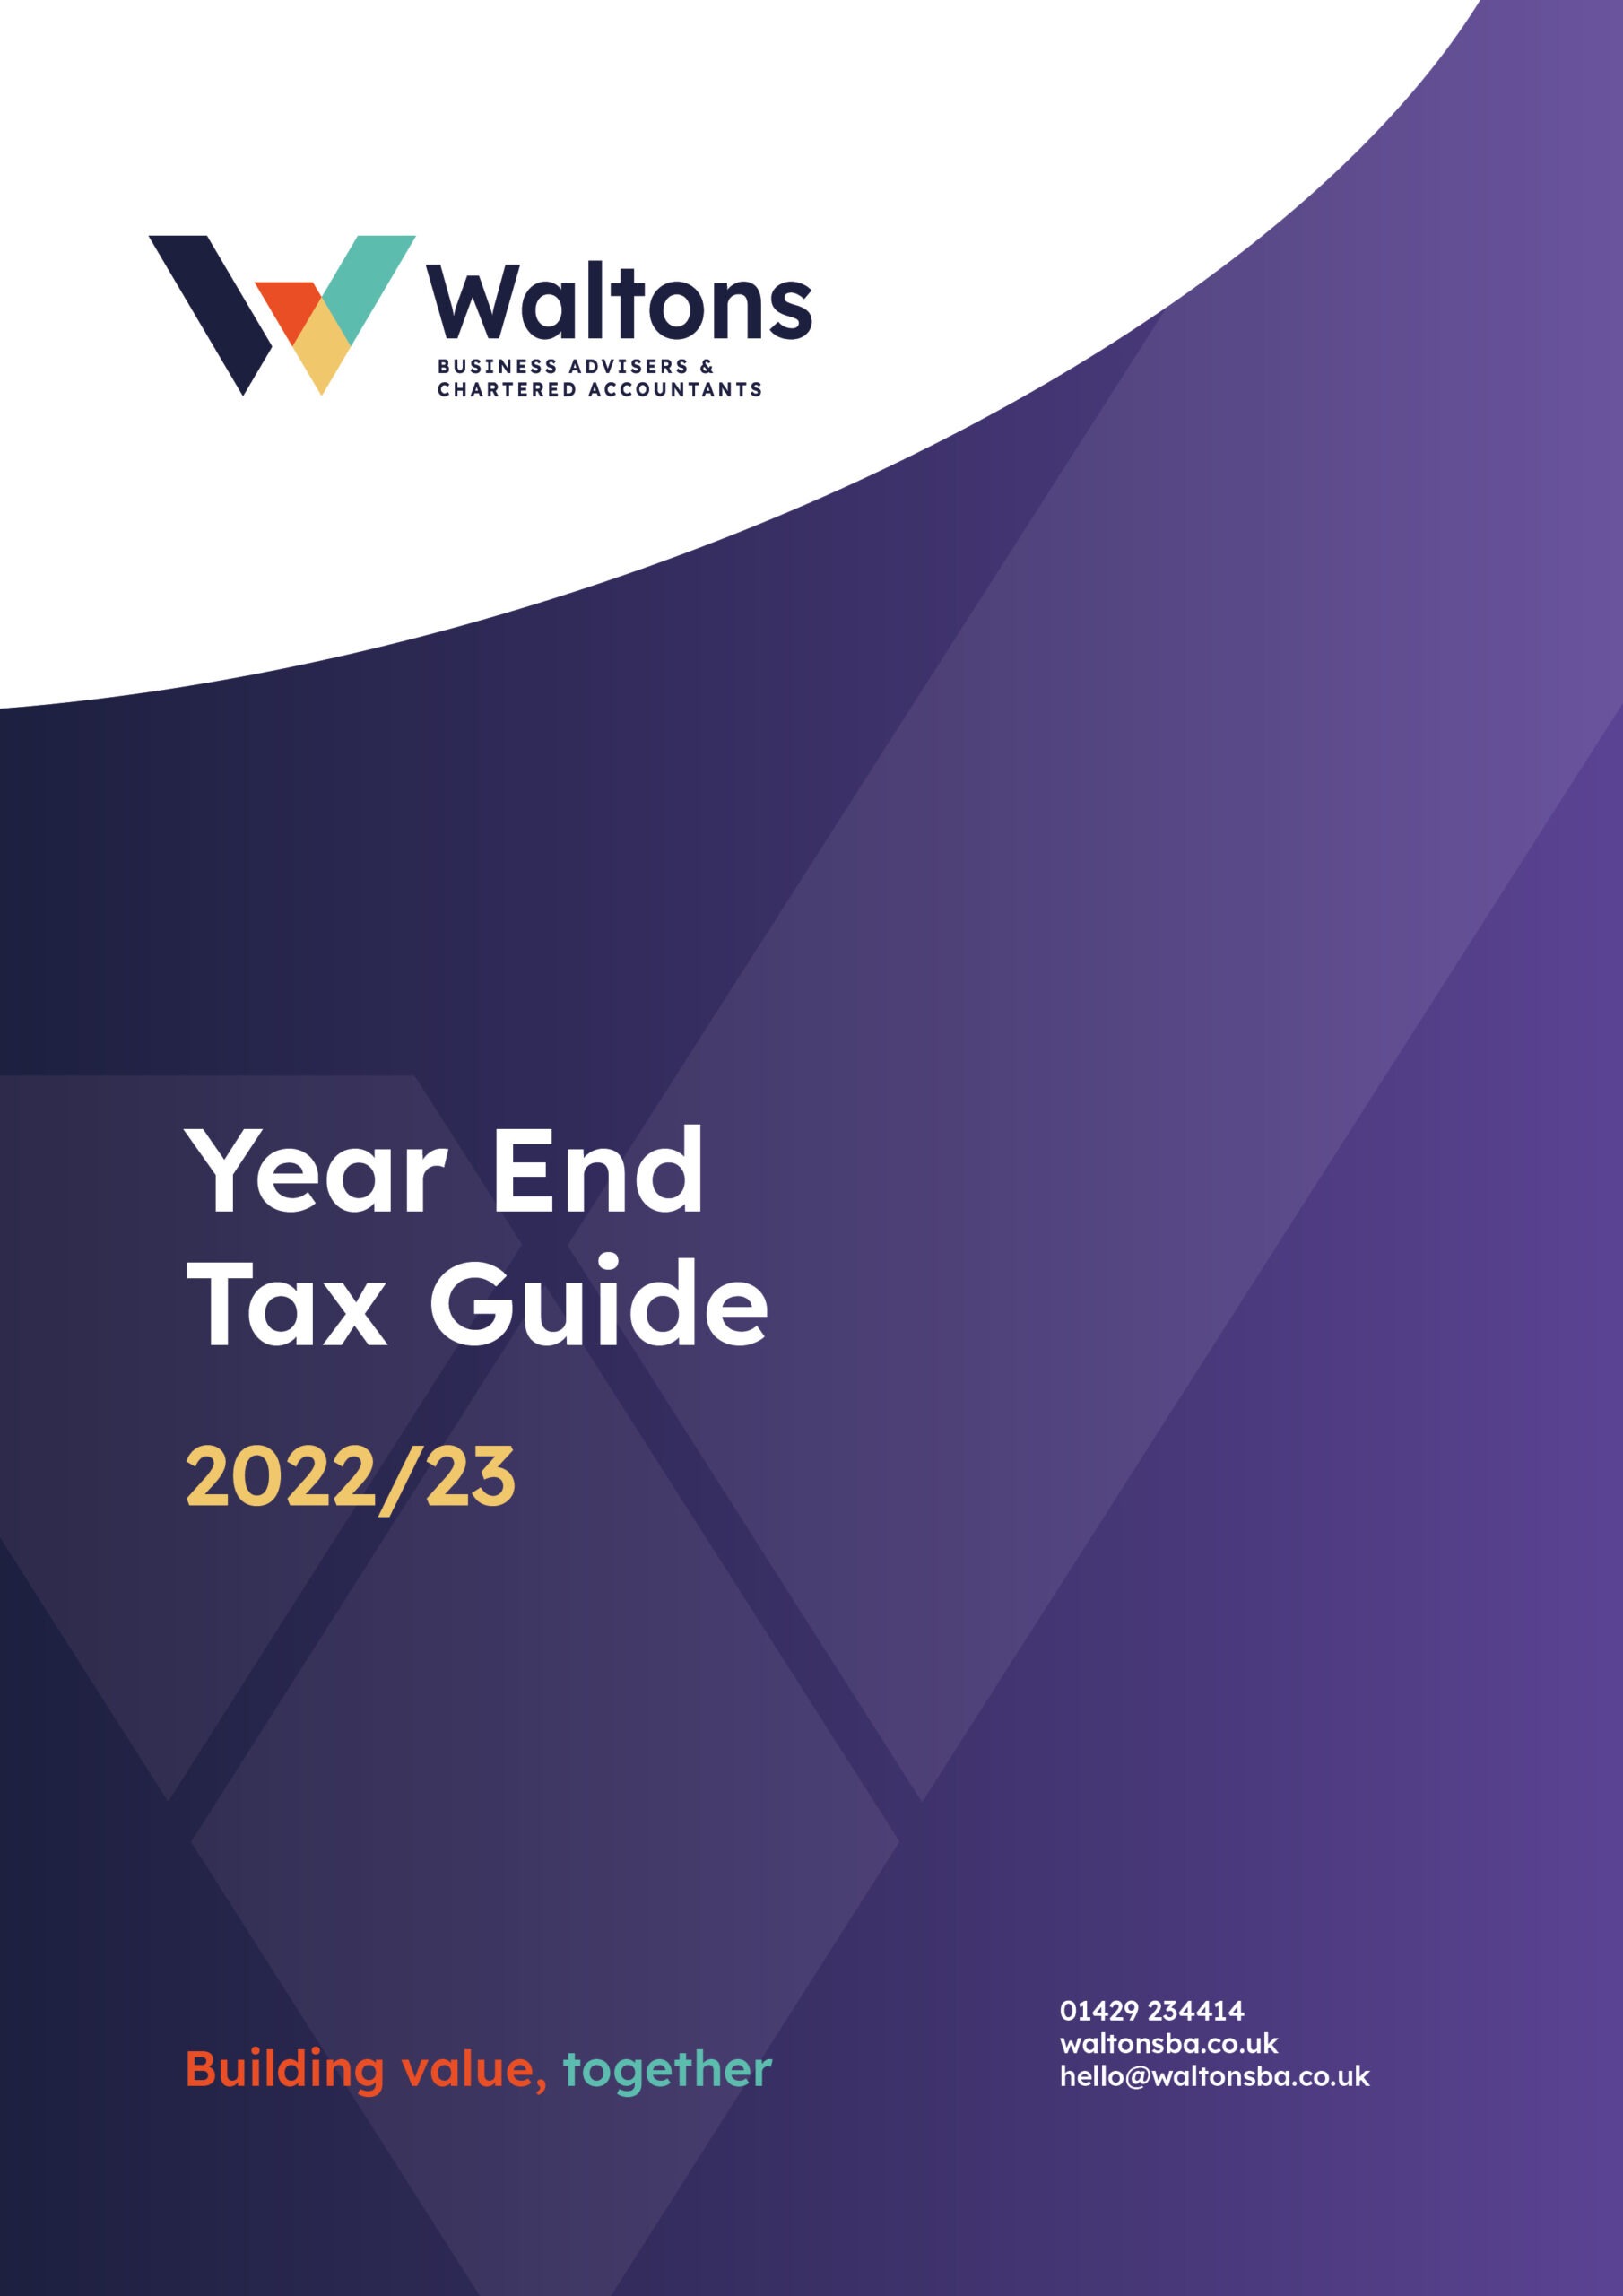 Year End Tax Guide 2022/23